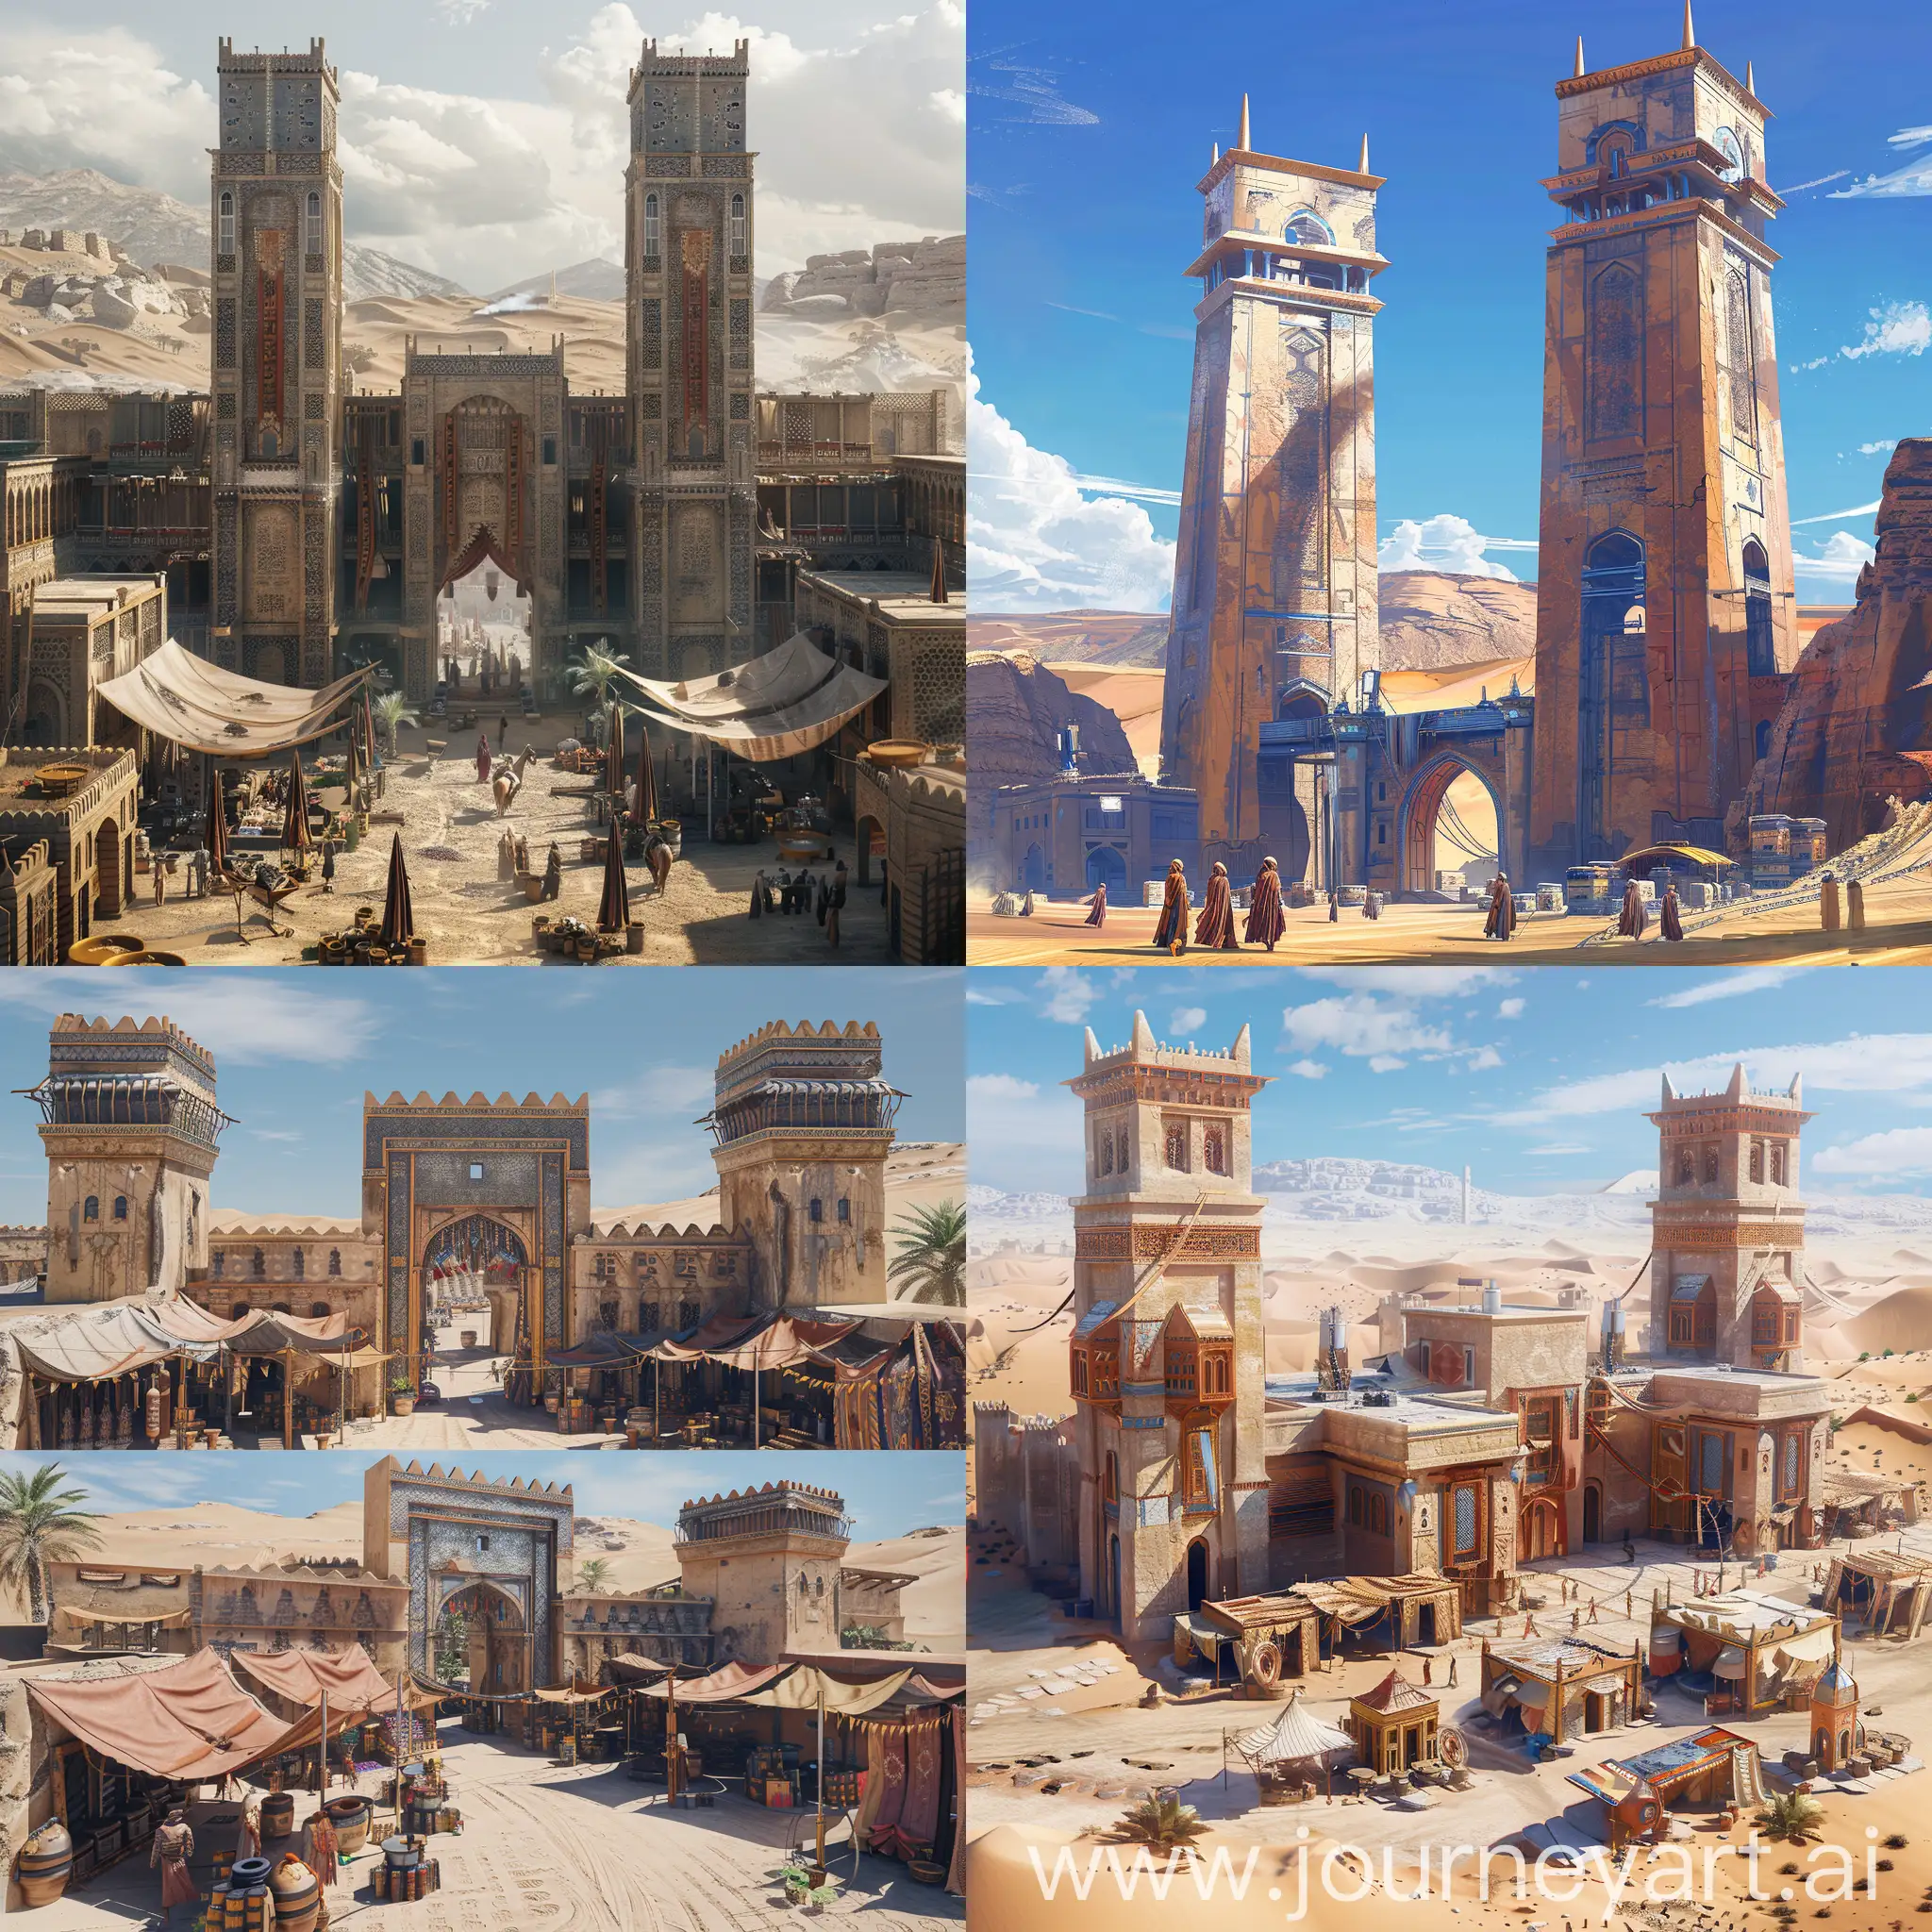 Sci fi market from the outside in the desert inspired by middle eastern architecture. There are also two squared towers